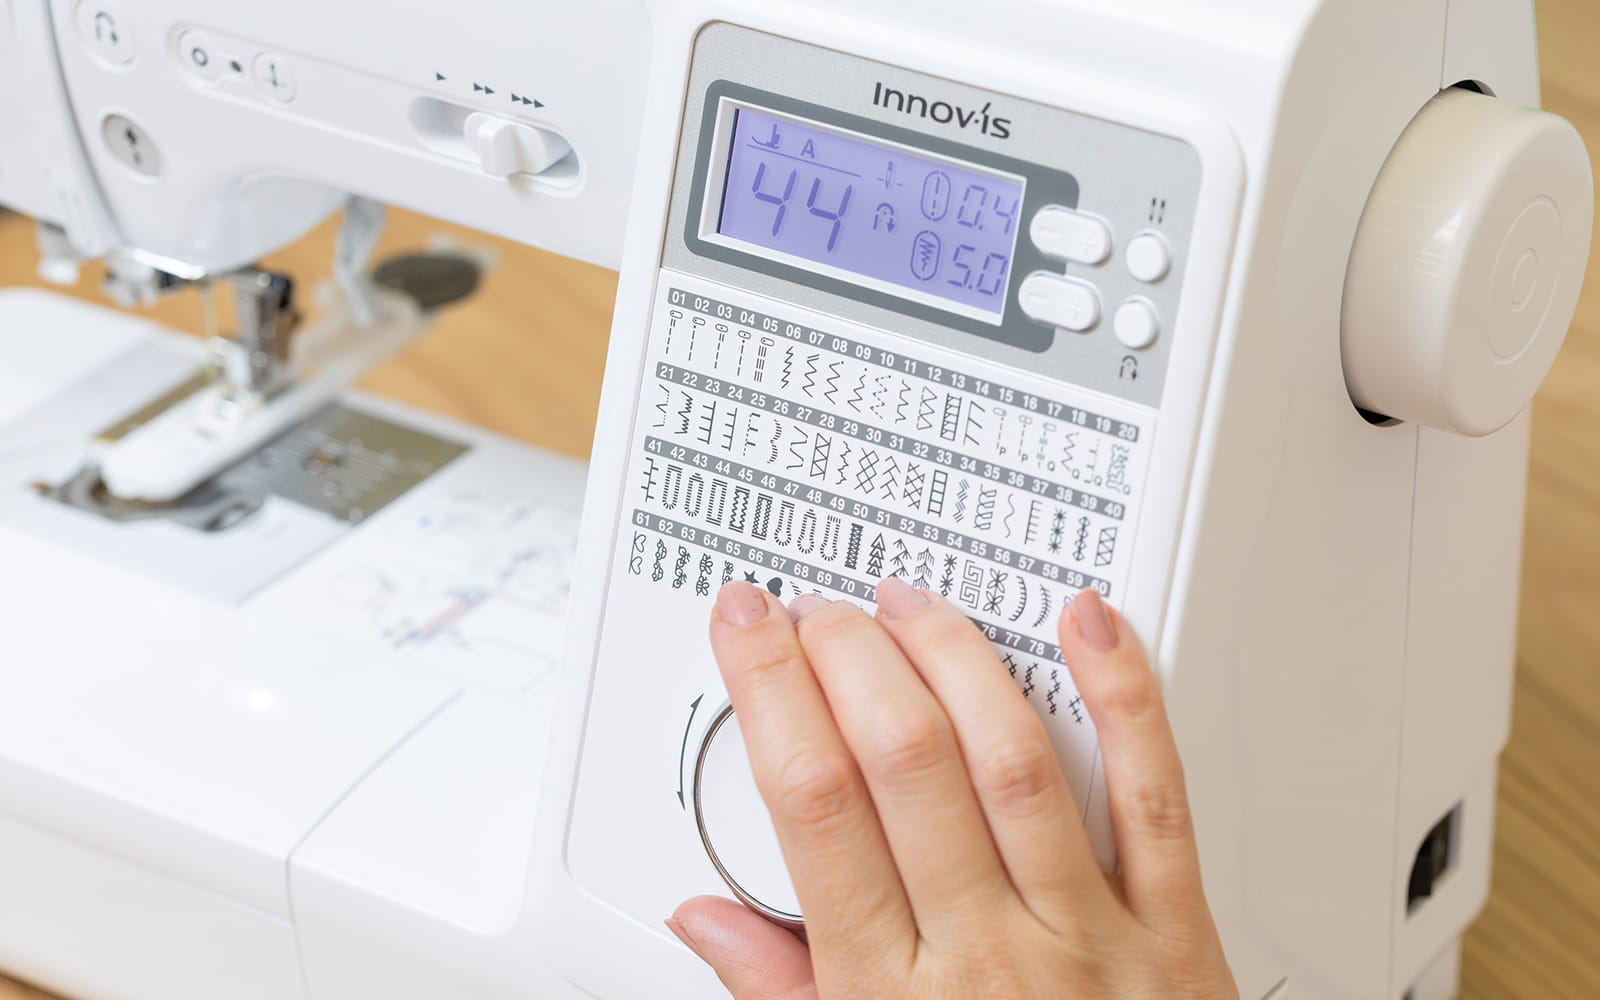 Hand on jog dial choosing sewing stitch on sewing machine